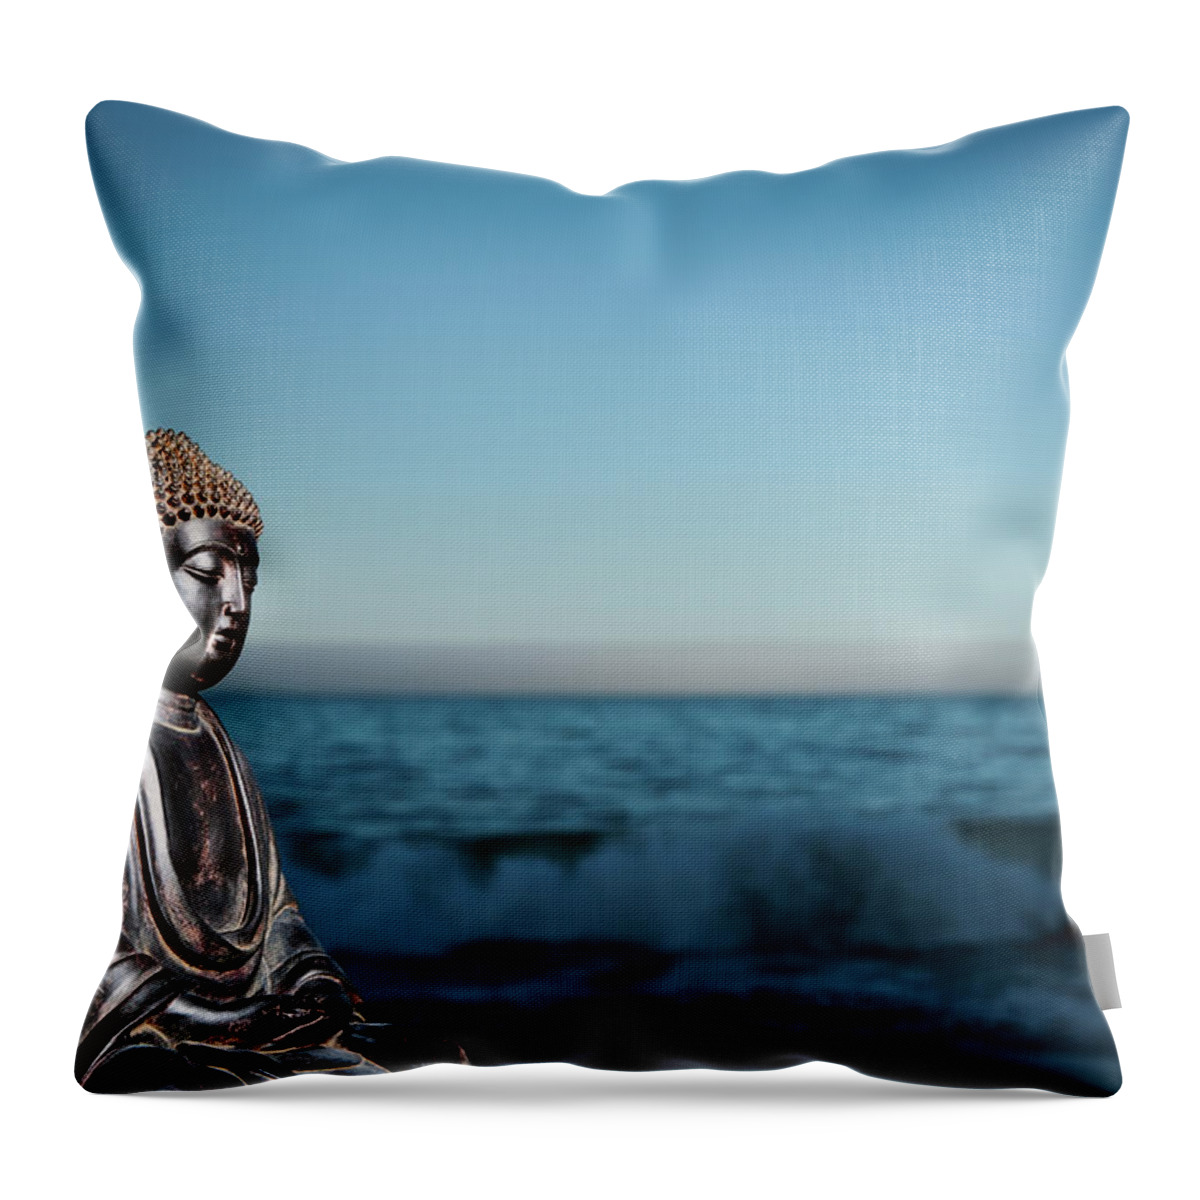 Water's Edge Throw Pillow featuring the photograph Japanese Buddha Statue At Ocean Shore by Wesvandinter